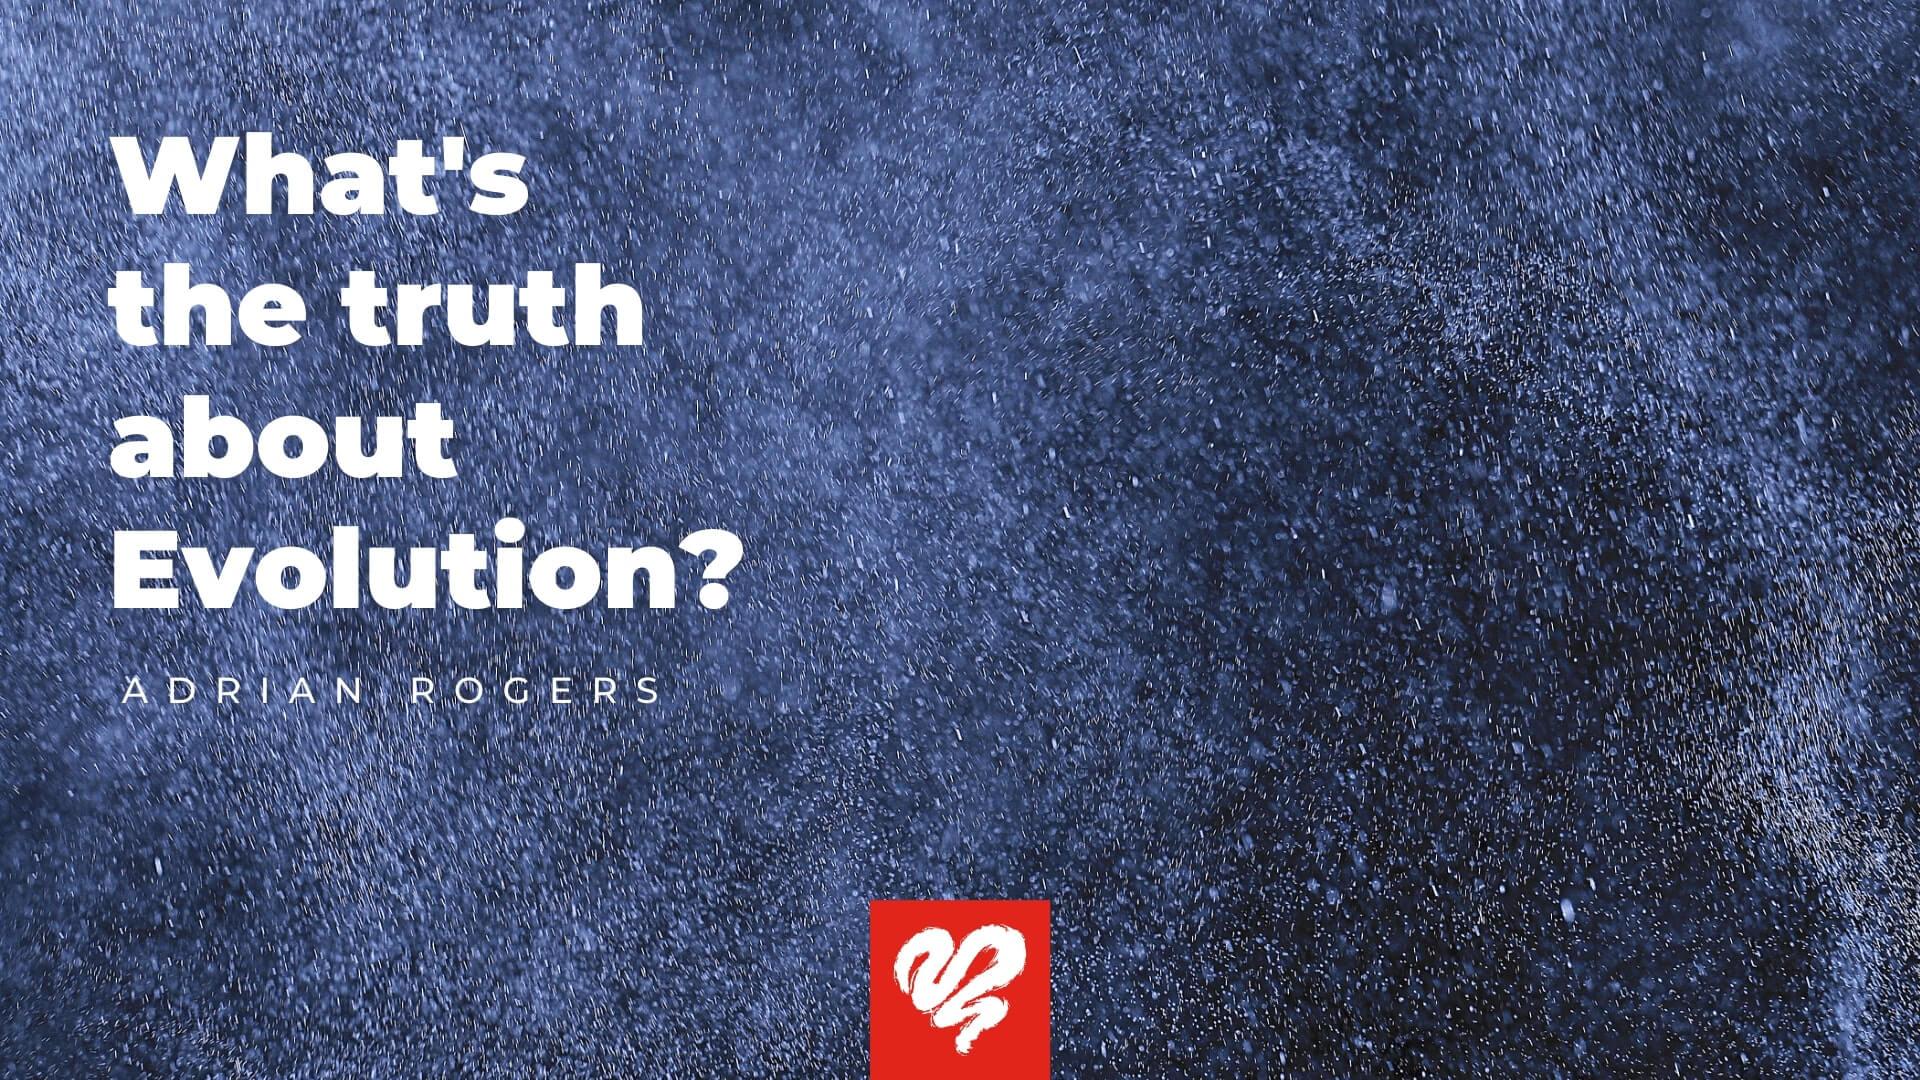 What is the truth about evolution?